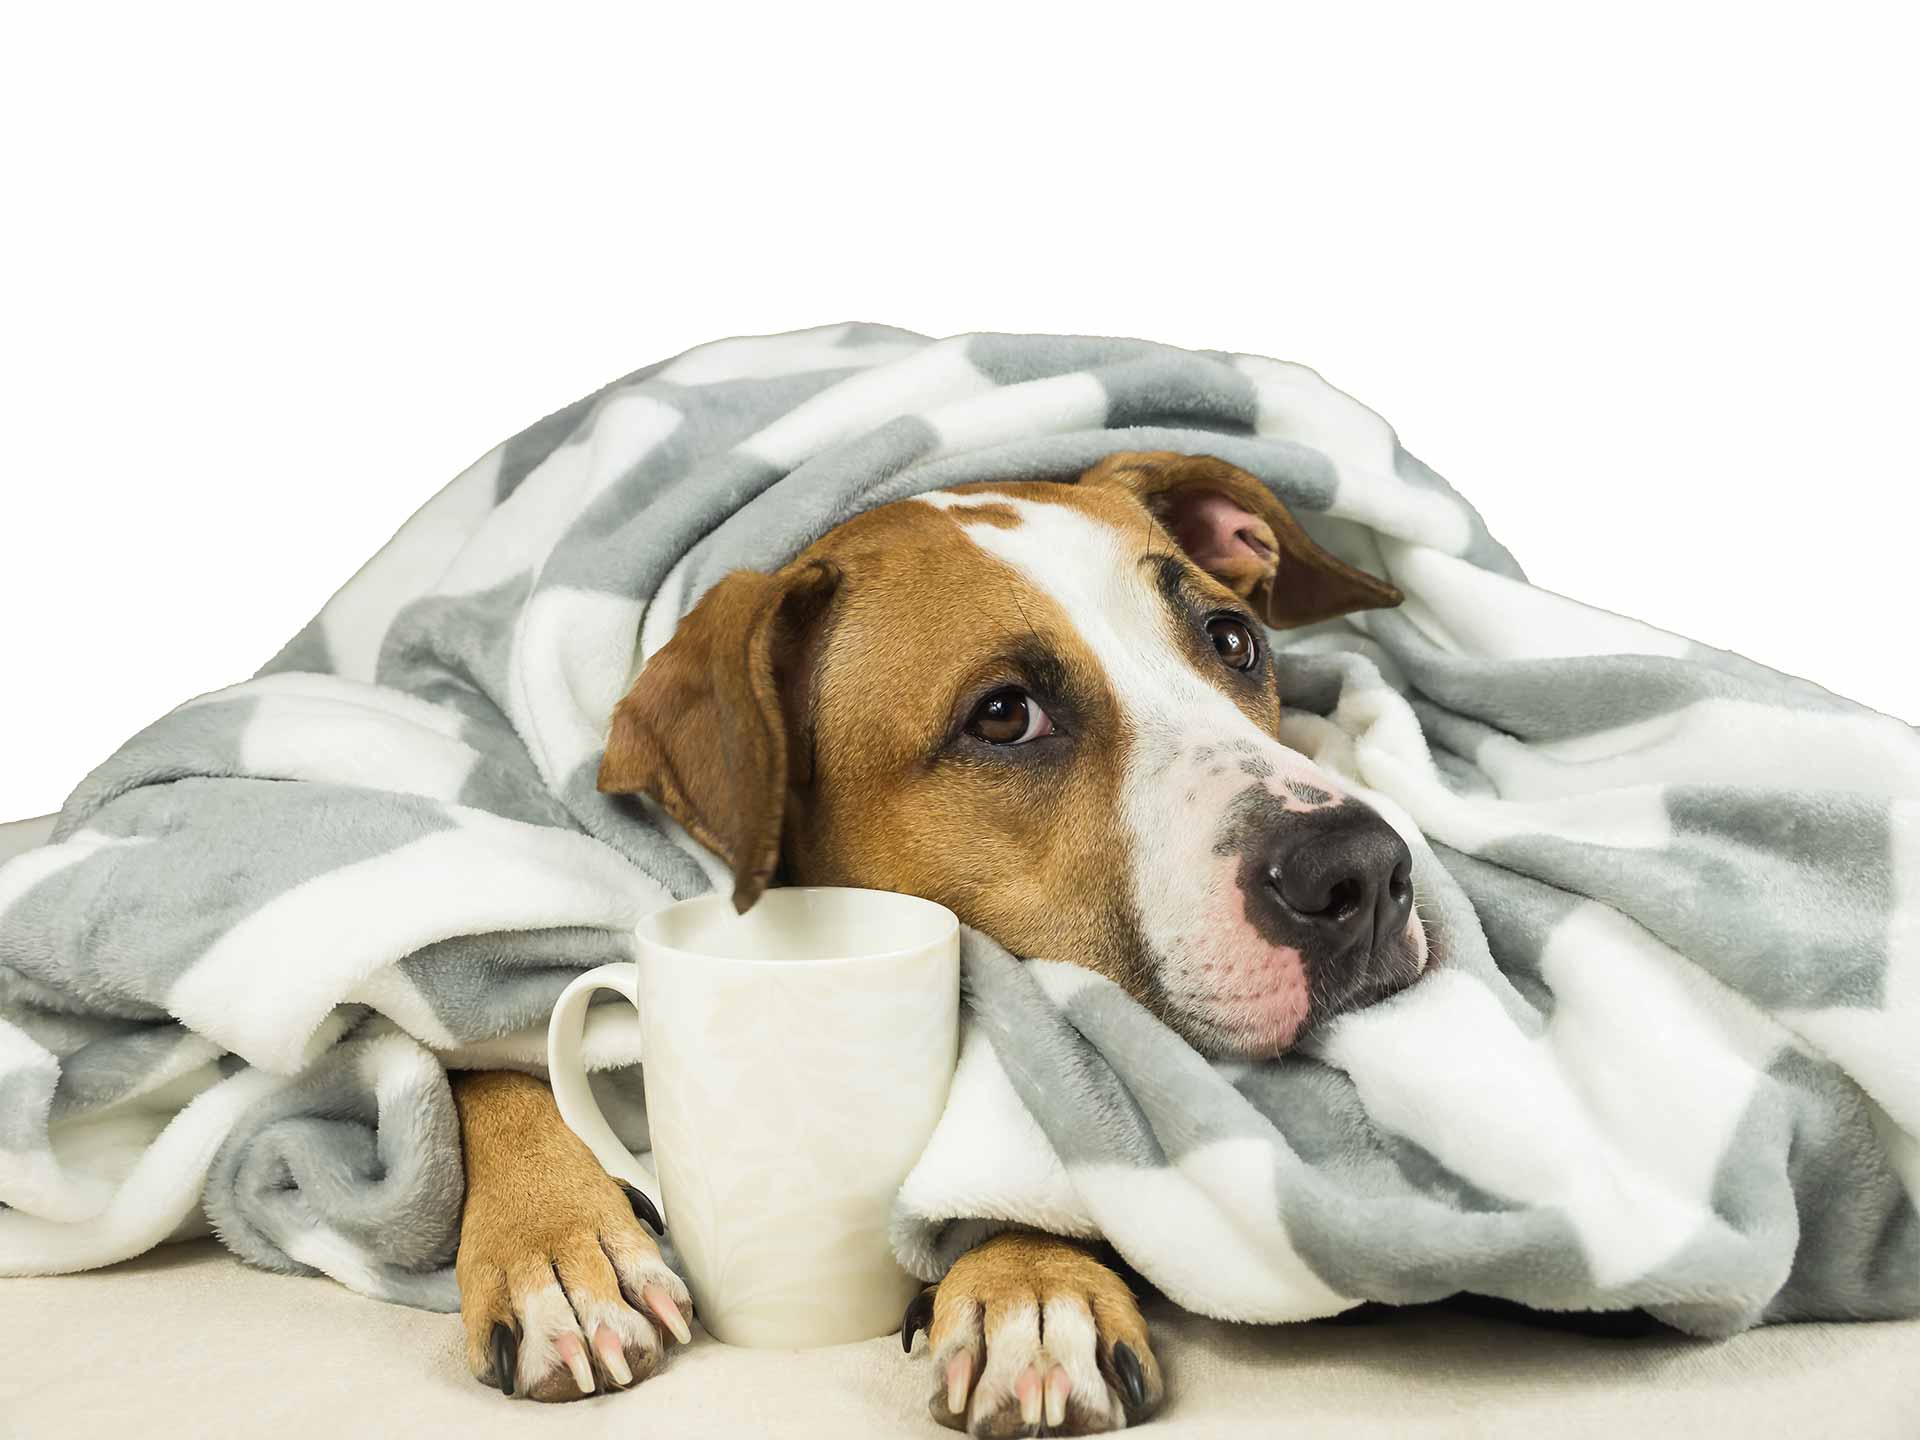 Recovering dog under a blanket with a mug